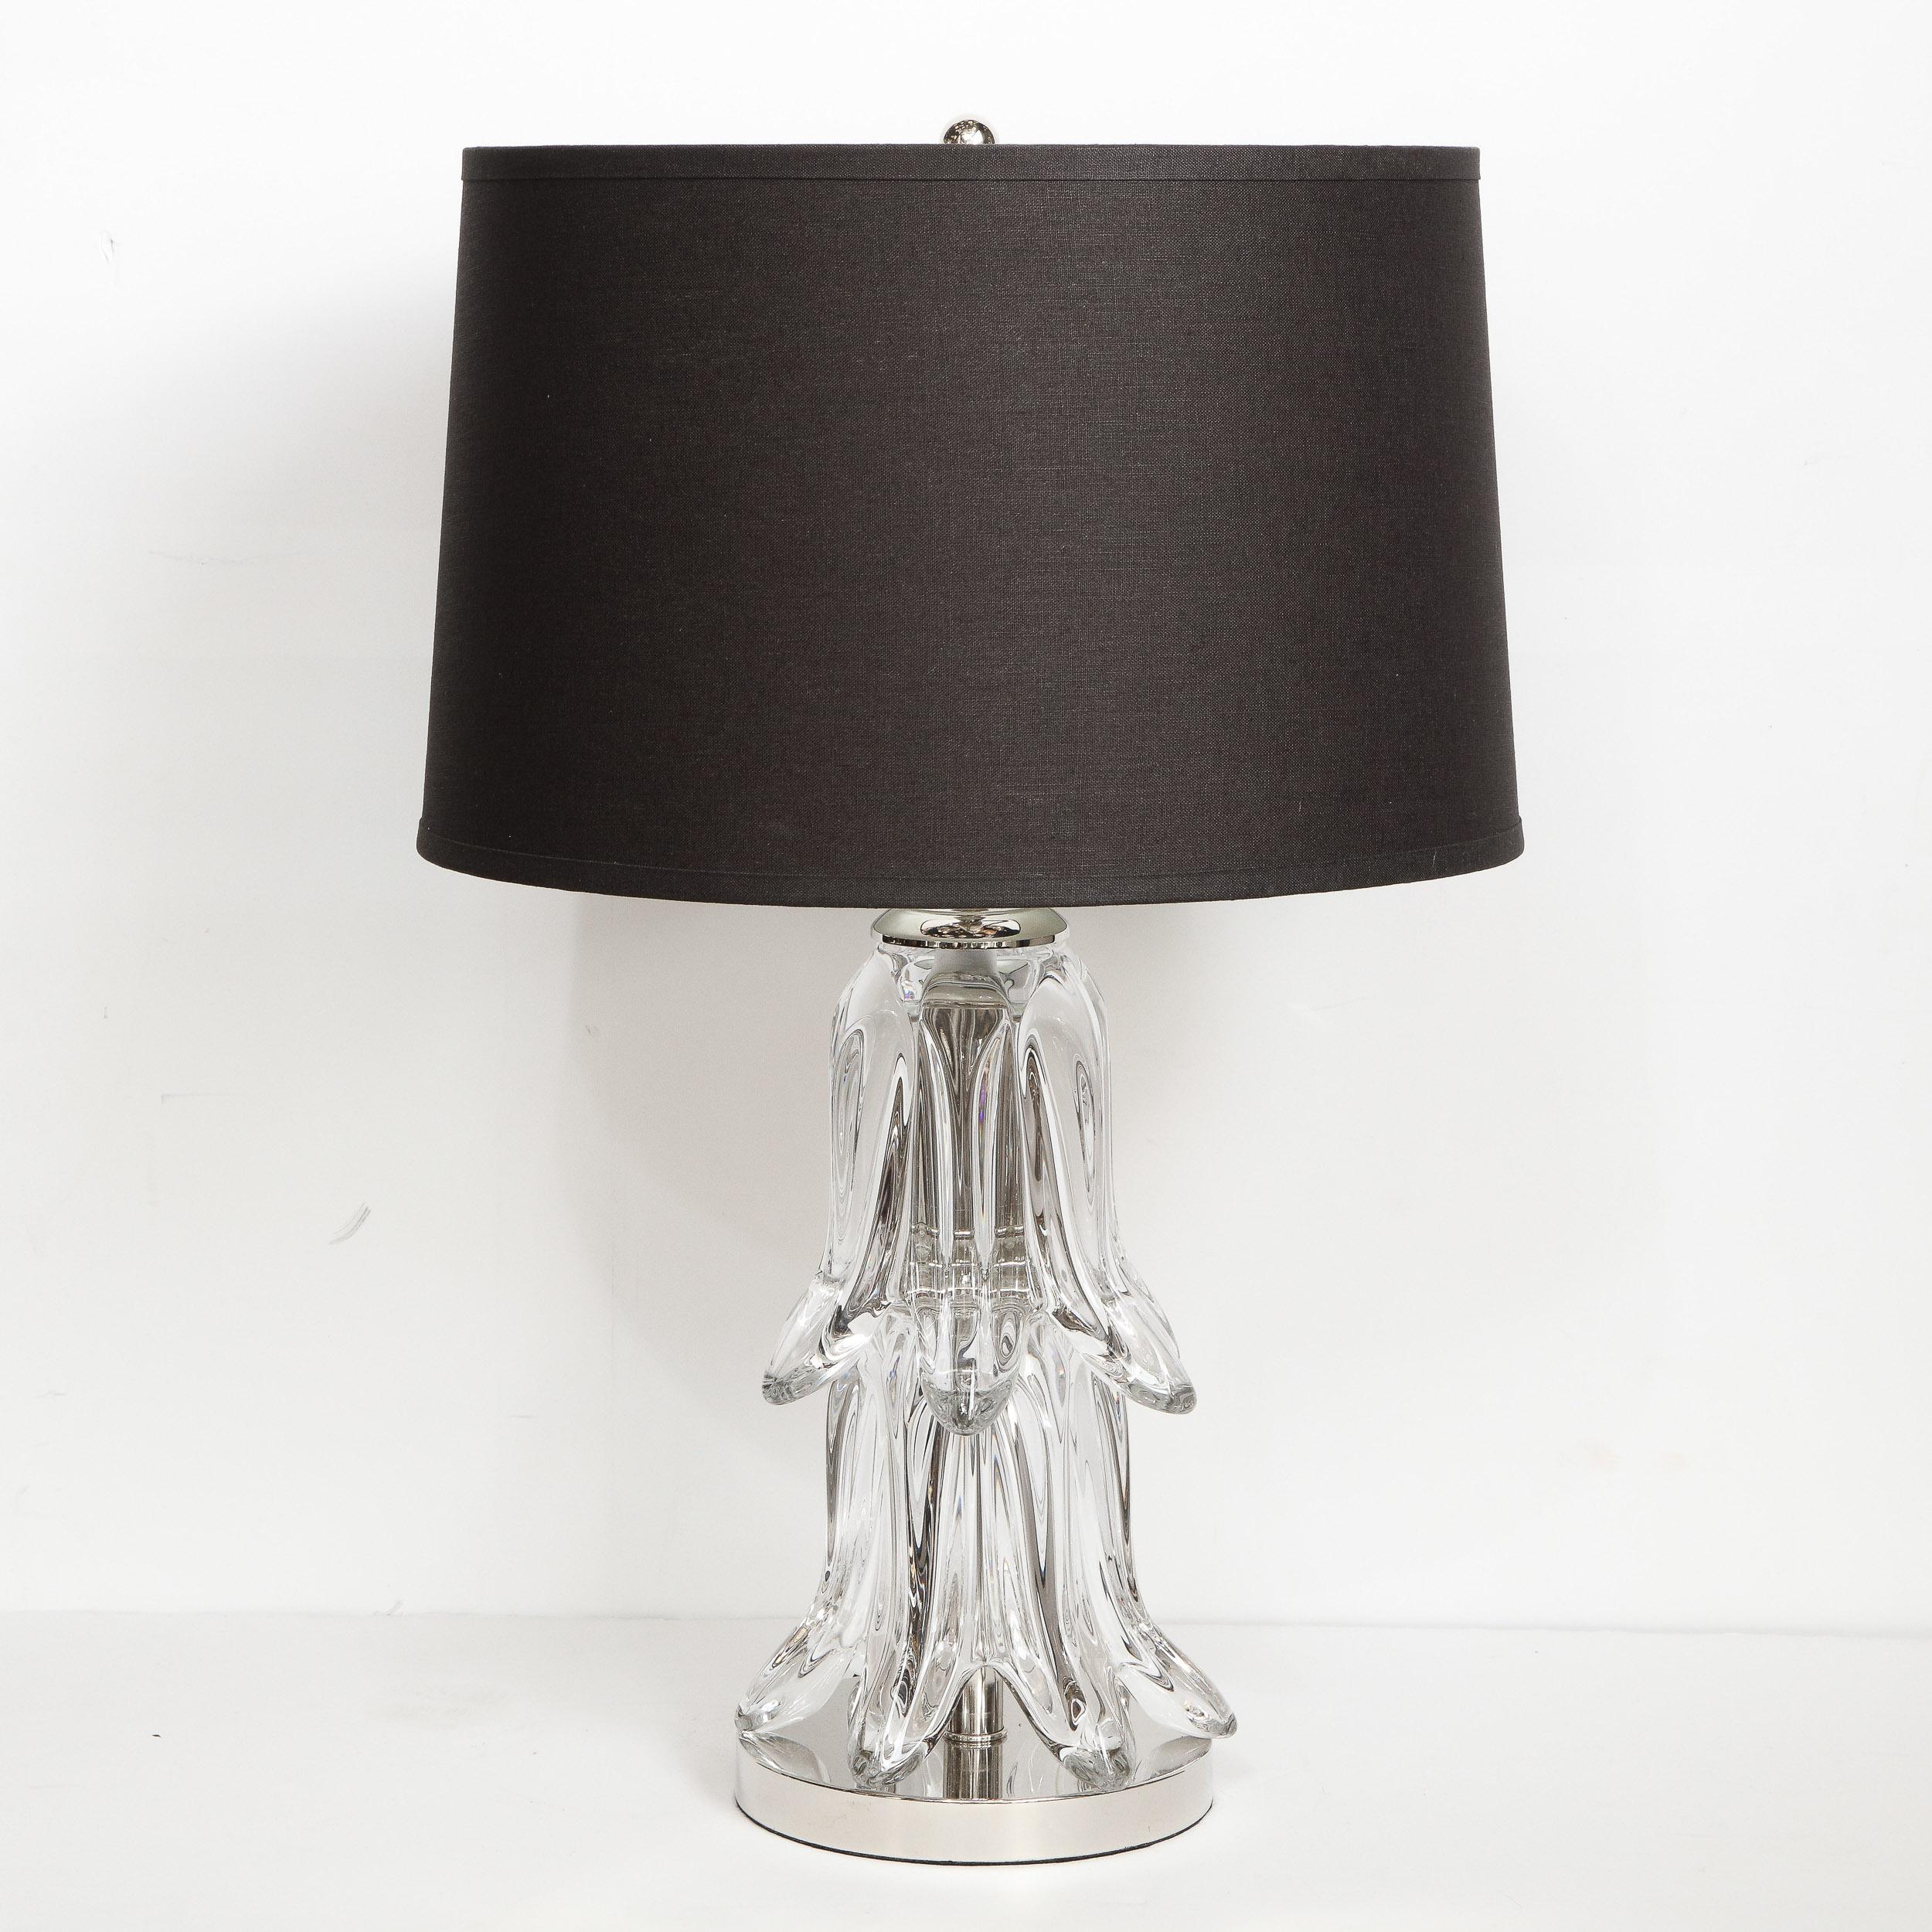 Mid-20th Century Pair of Mid-Century Modern Sculptural Translucent Glass and Chrome Table Lamps